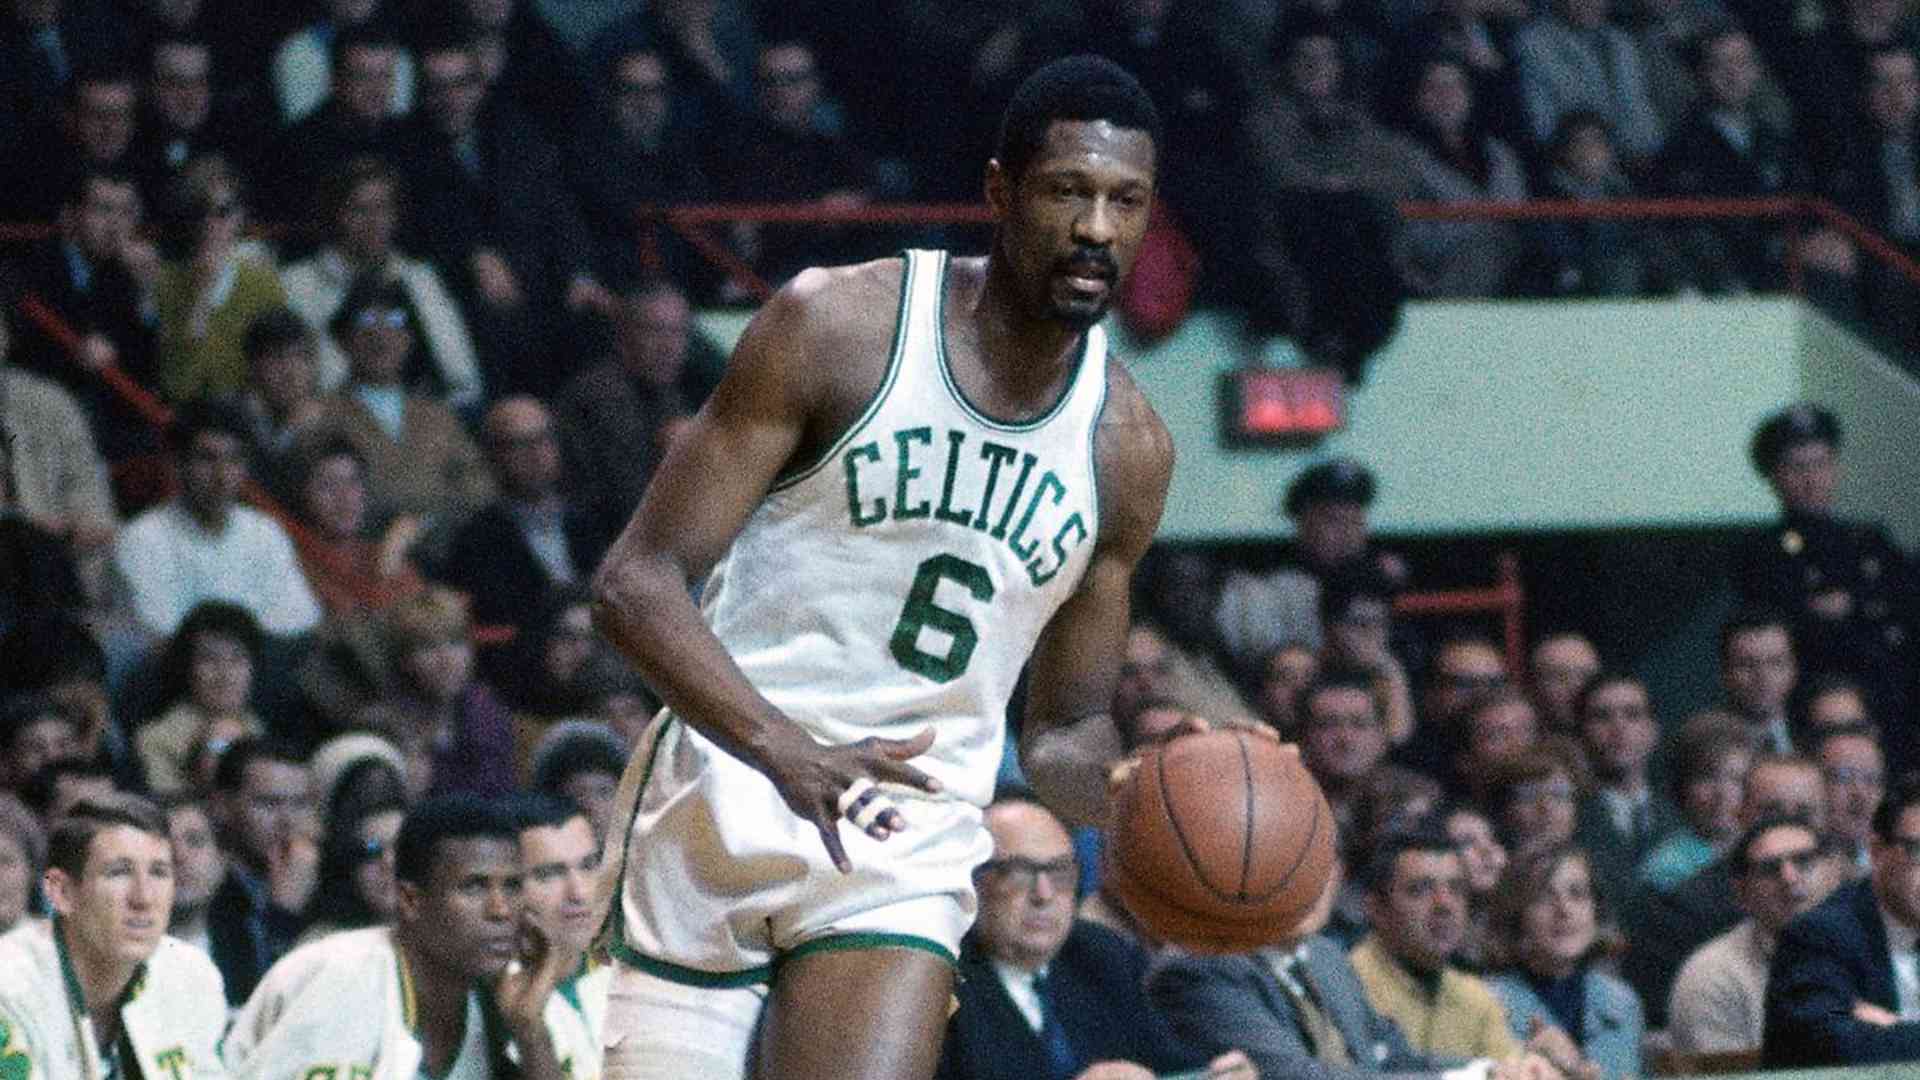 Bill Russell in a file photo. (Image credits: twitter)